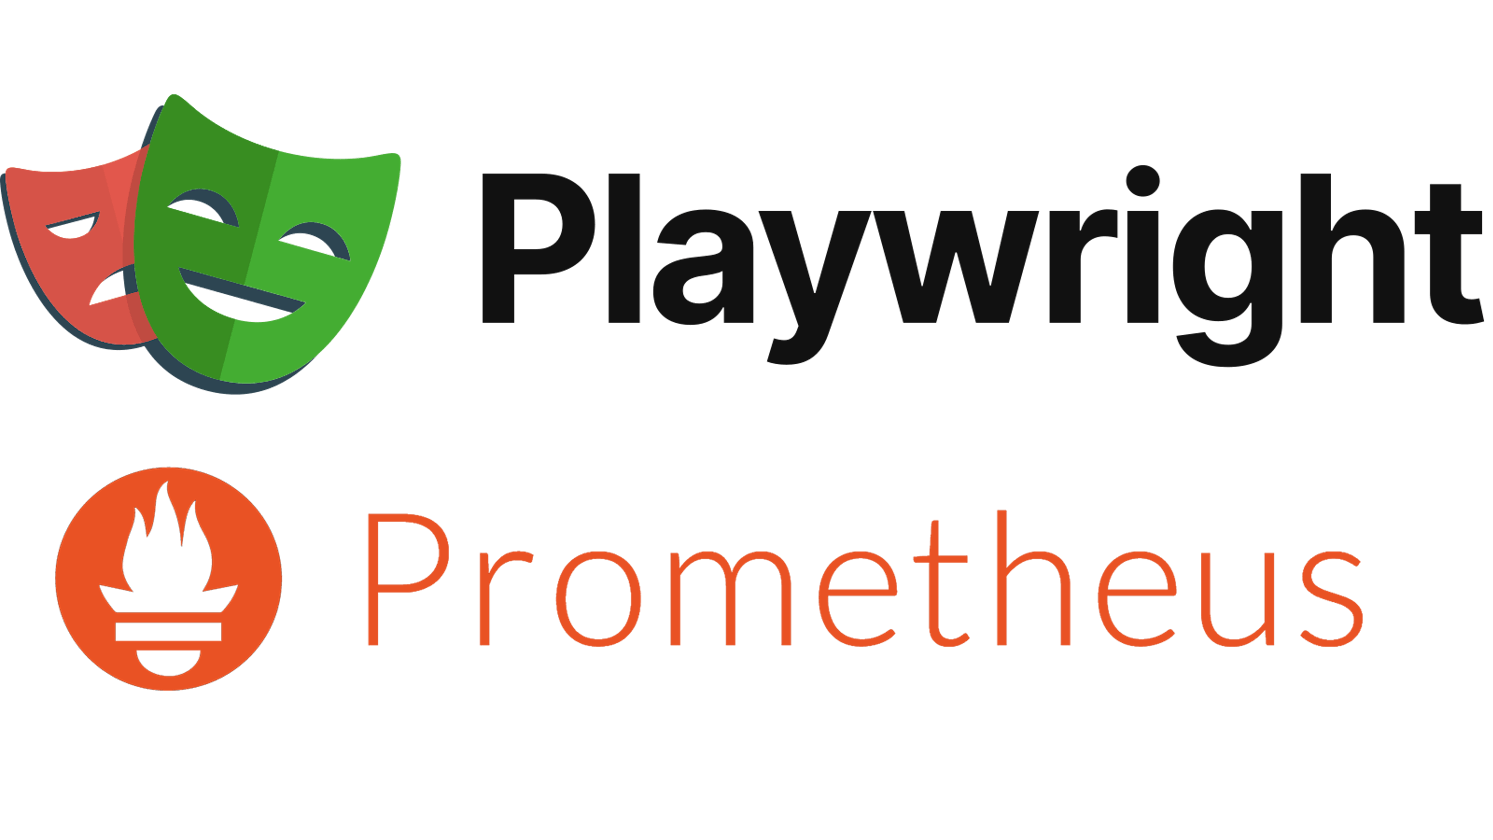 Playwright & Prometheus. Send your metrics in real-time